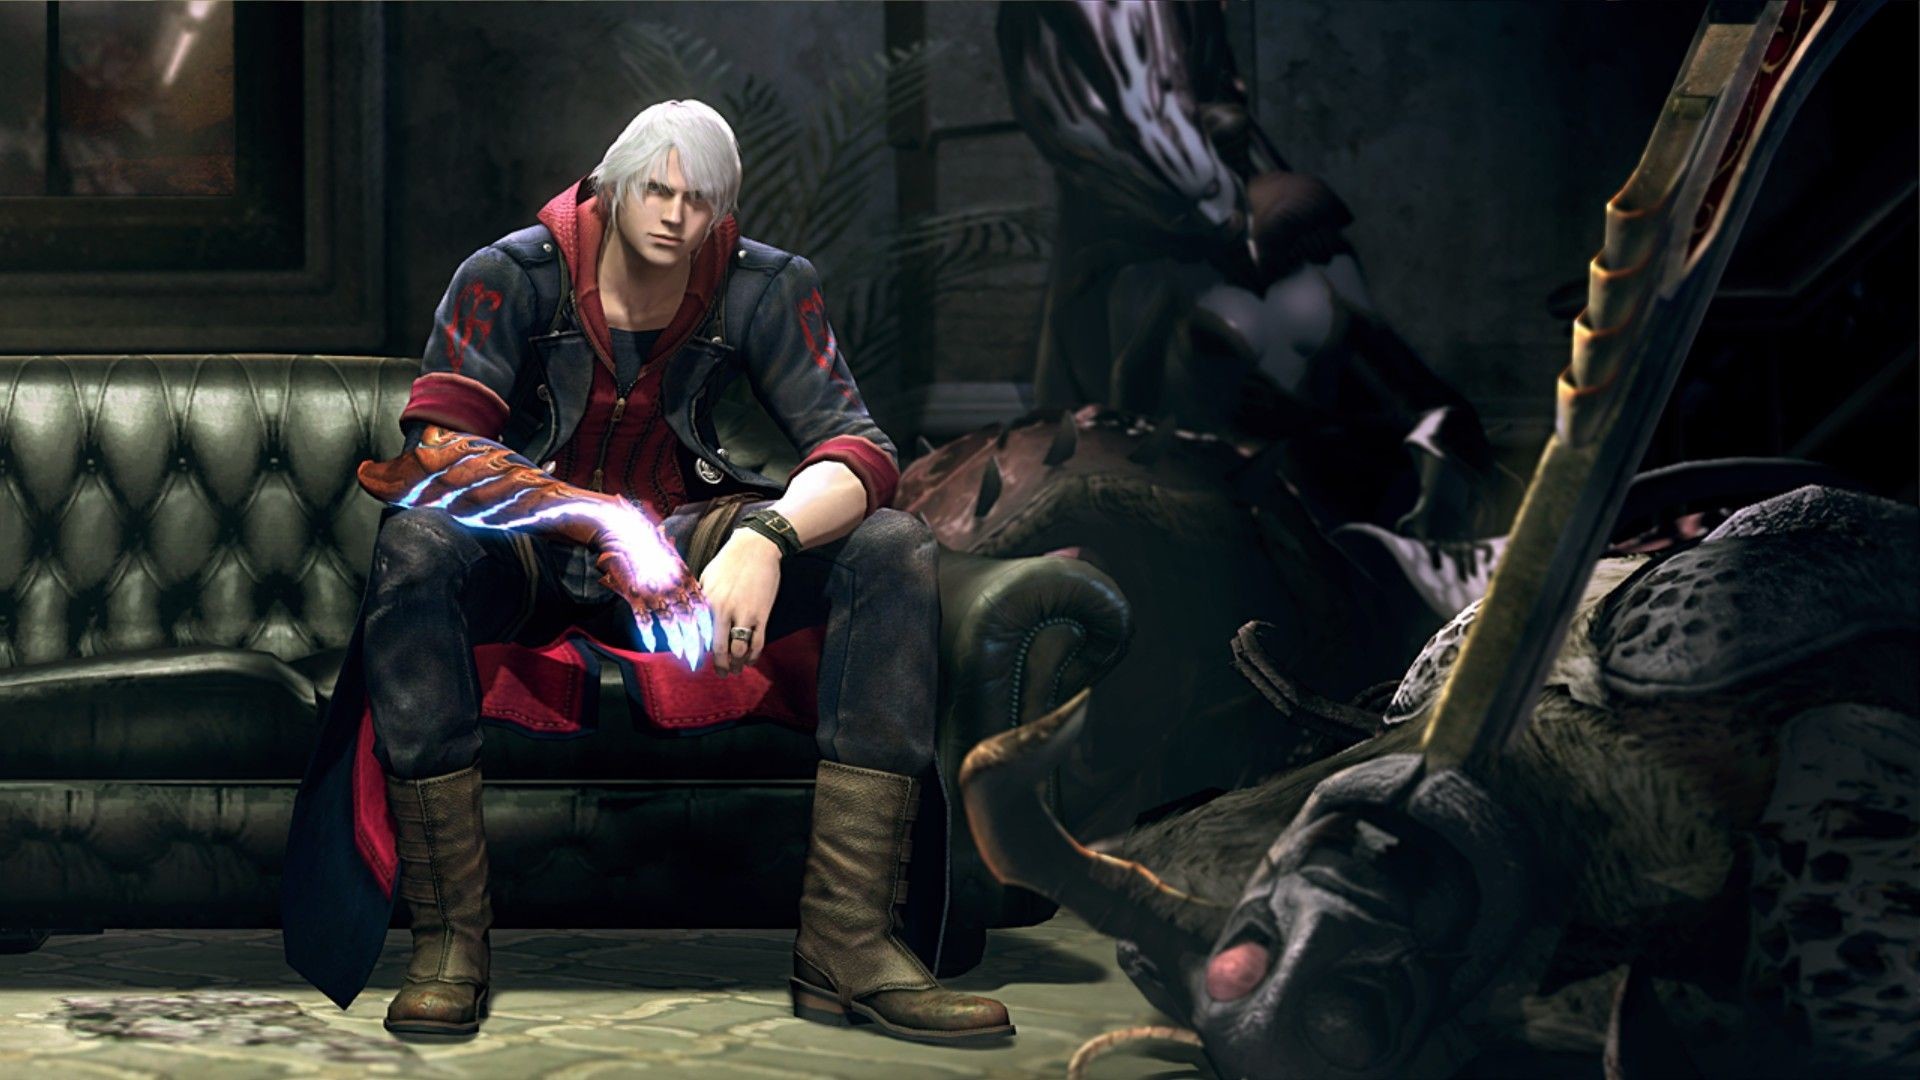 1920x1080 Devil May Cry 4 Wallpapers by Treesie on DeviantArt